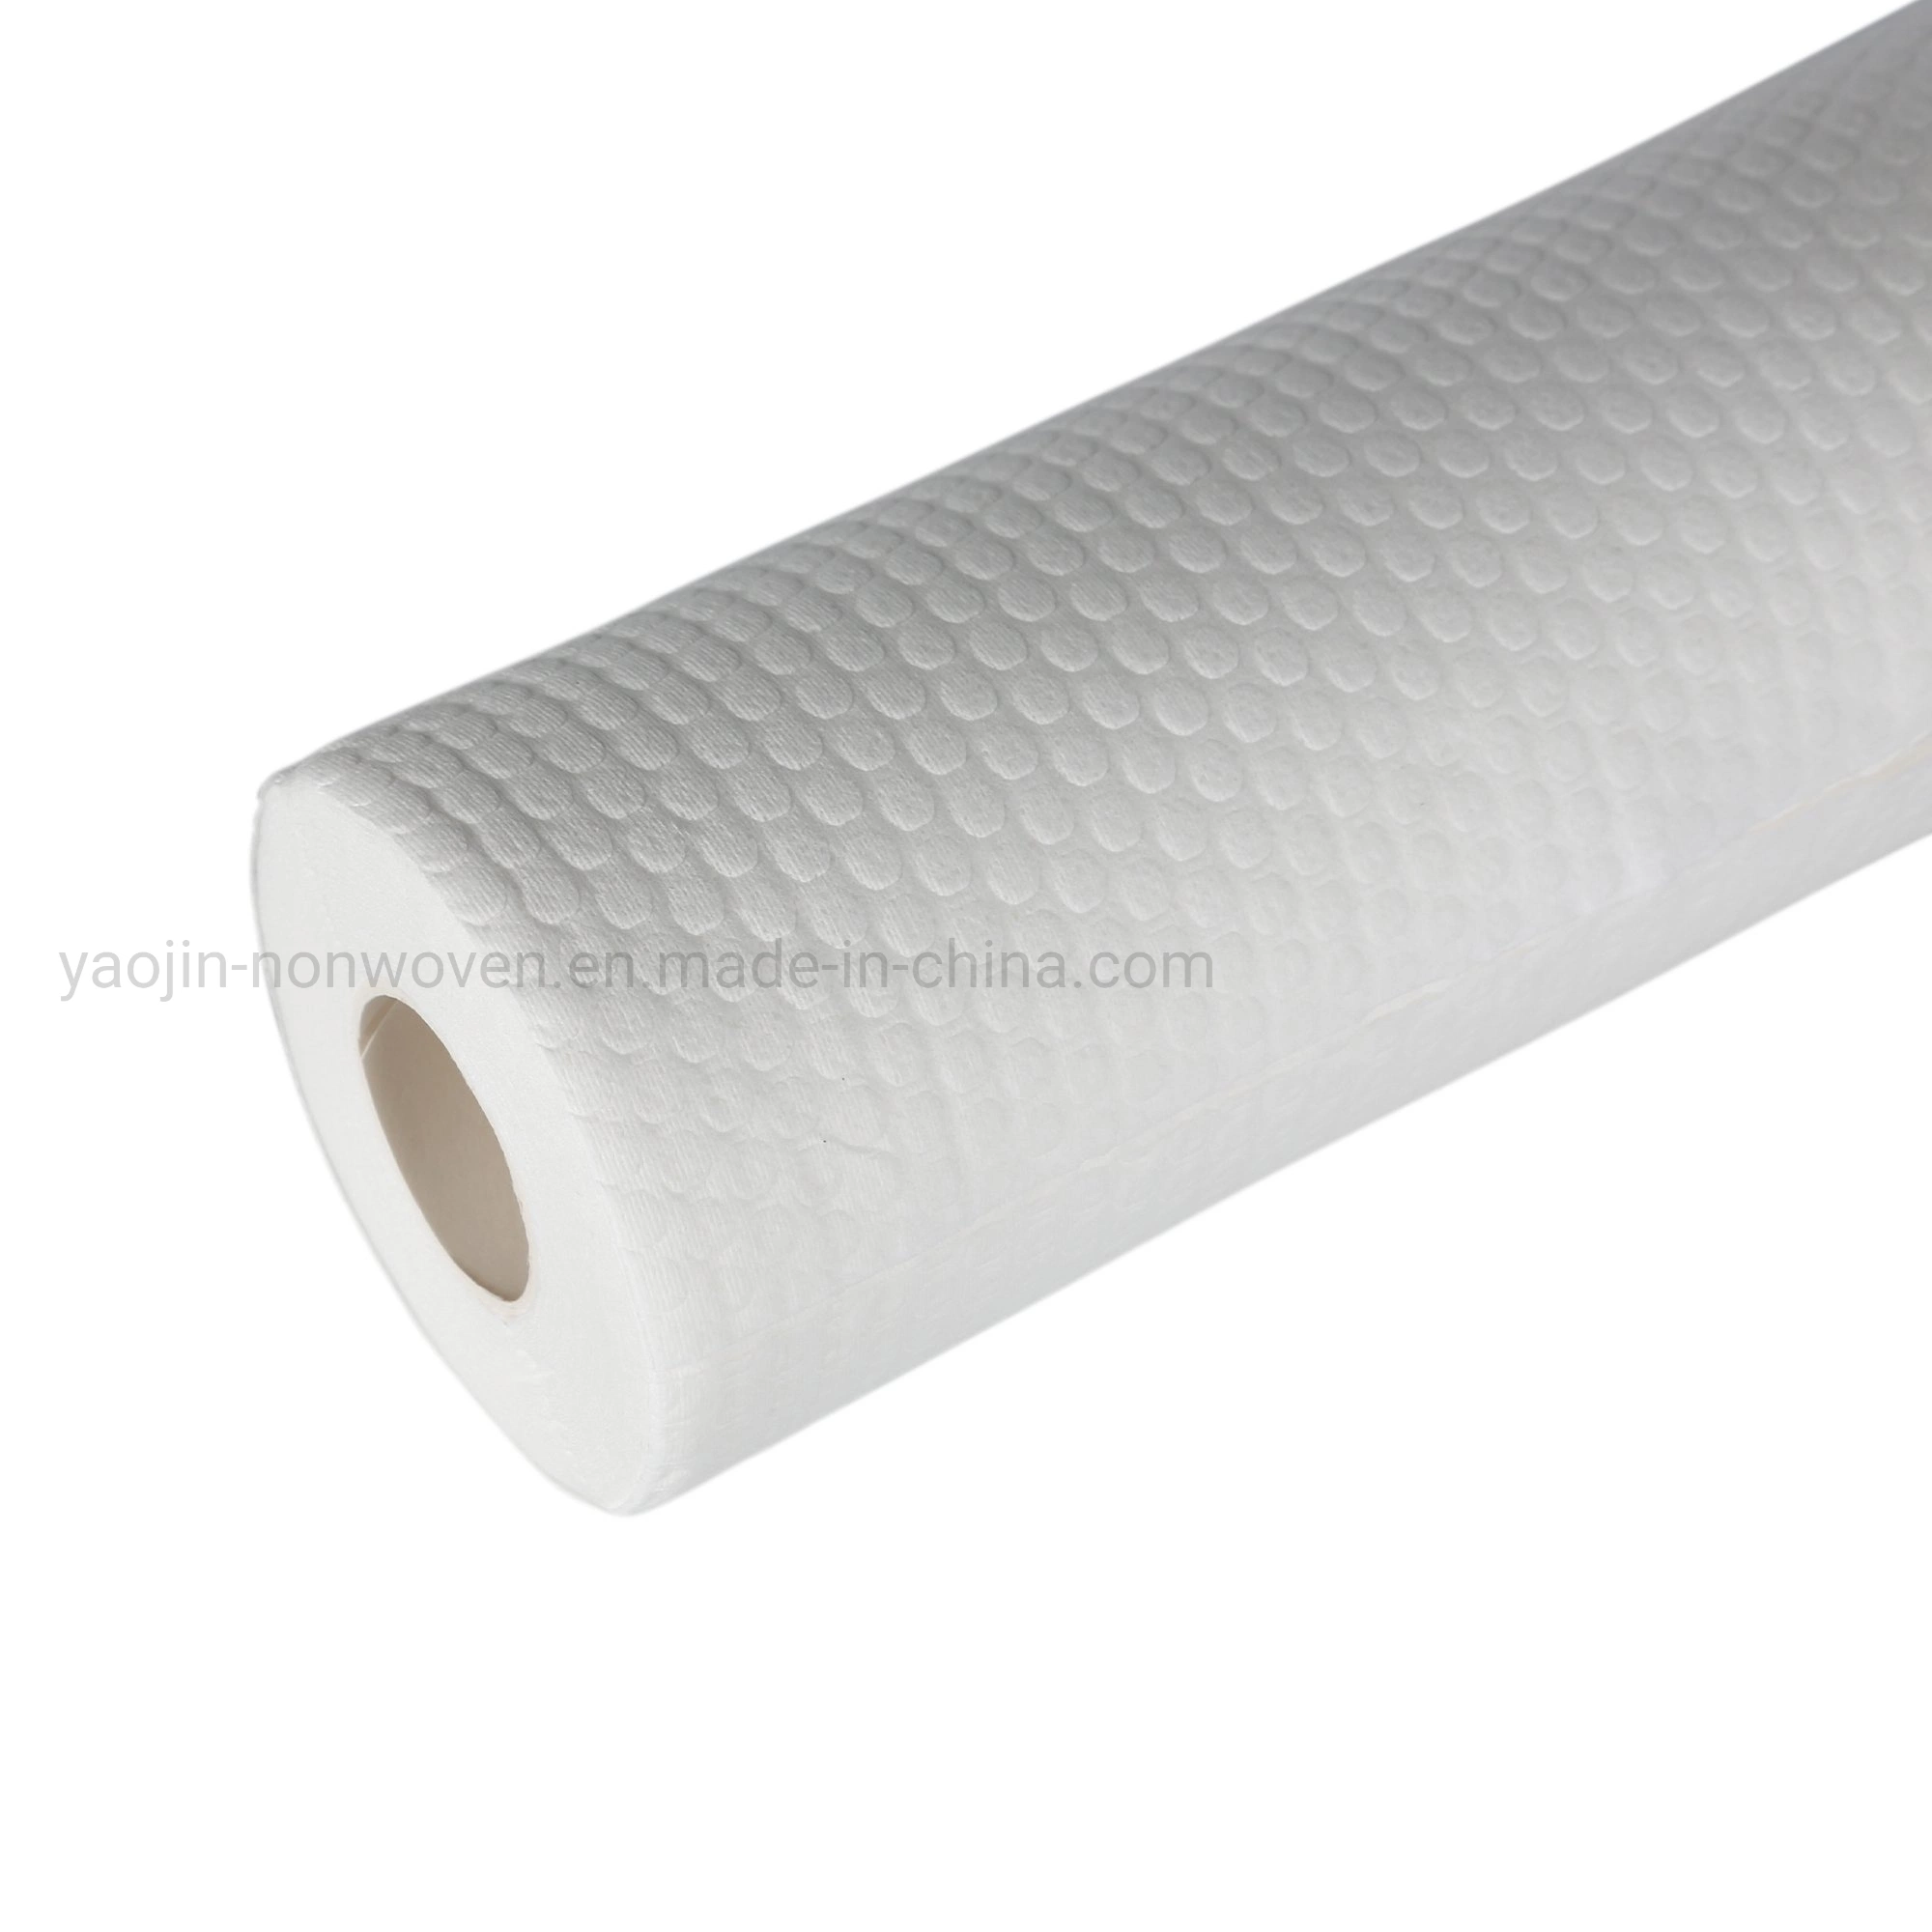 Household Super Absorbent Cleaning Non-Woven Fabric